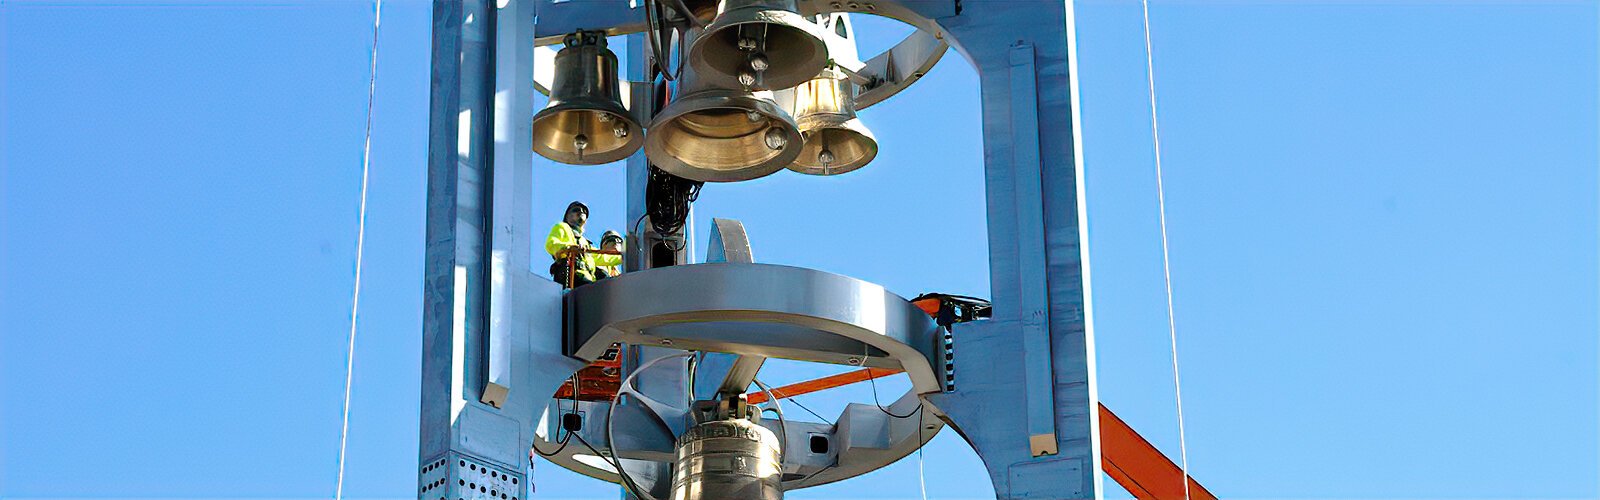 Workers from the Beck Group inspect the newly installed elements in the Ars Sonora. The musical sculpture has 4 specially designed swinging bells – 3 UT bells surrounding a medium fixed bell, and the largest of the 4, the Sykes bell, below.